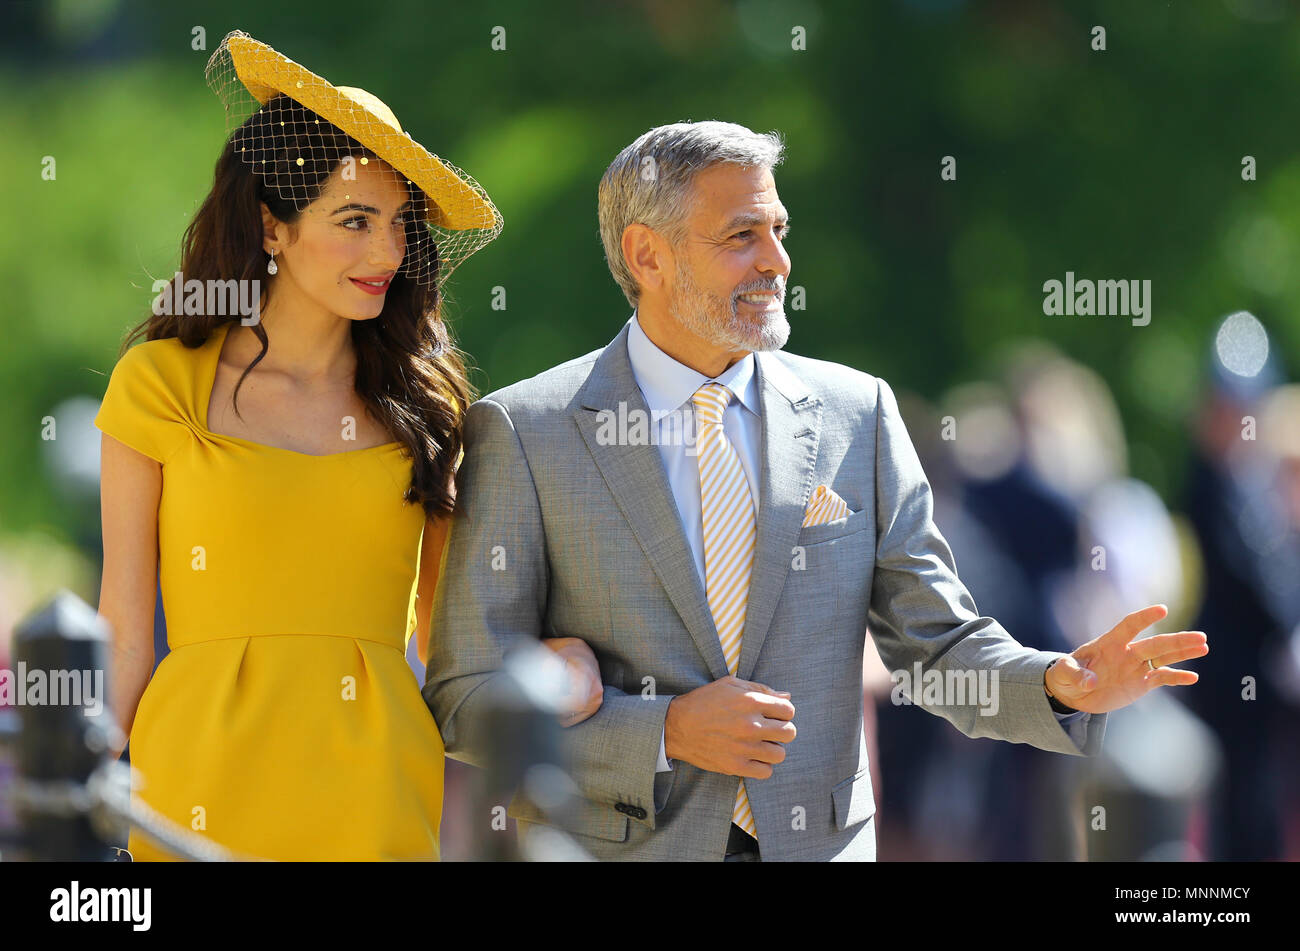 Amal Clooney and George Clooney arrive at St George's Chapel at Windsor Castle for the wedding of Meghan Markle and Prince Harry. Stock Photo